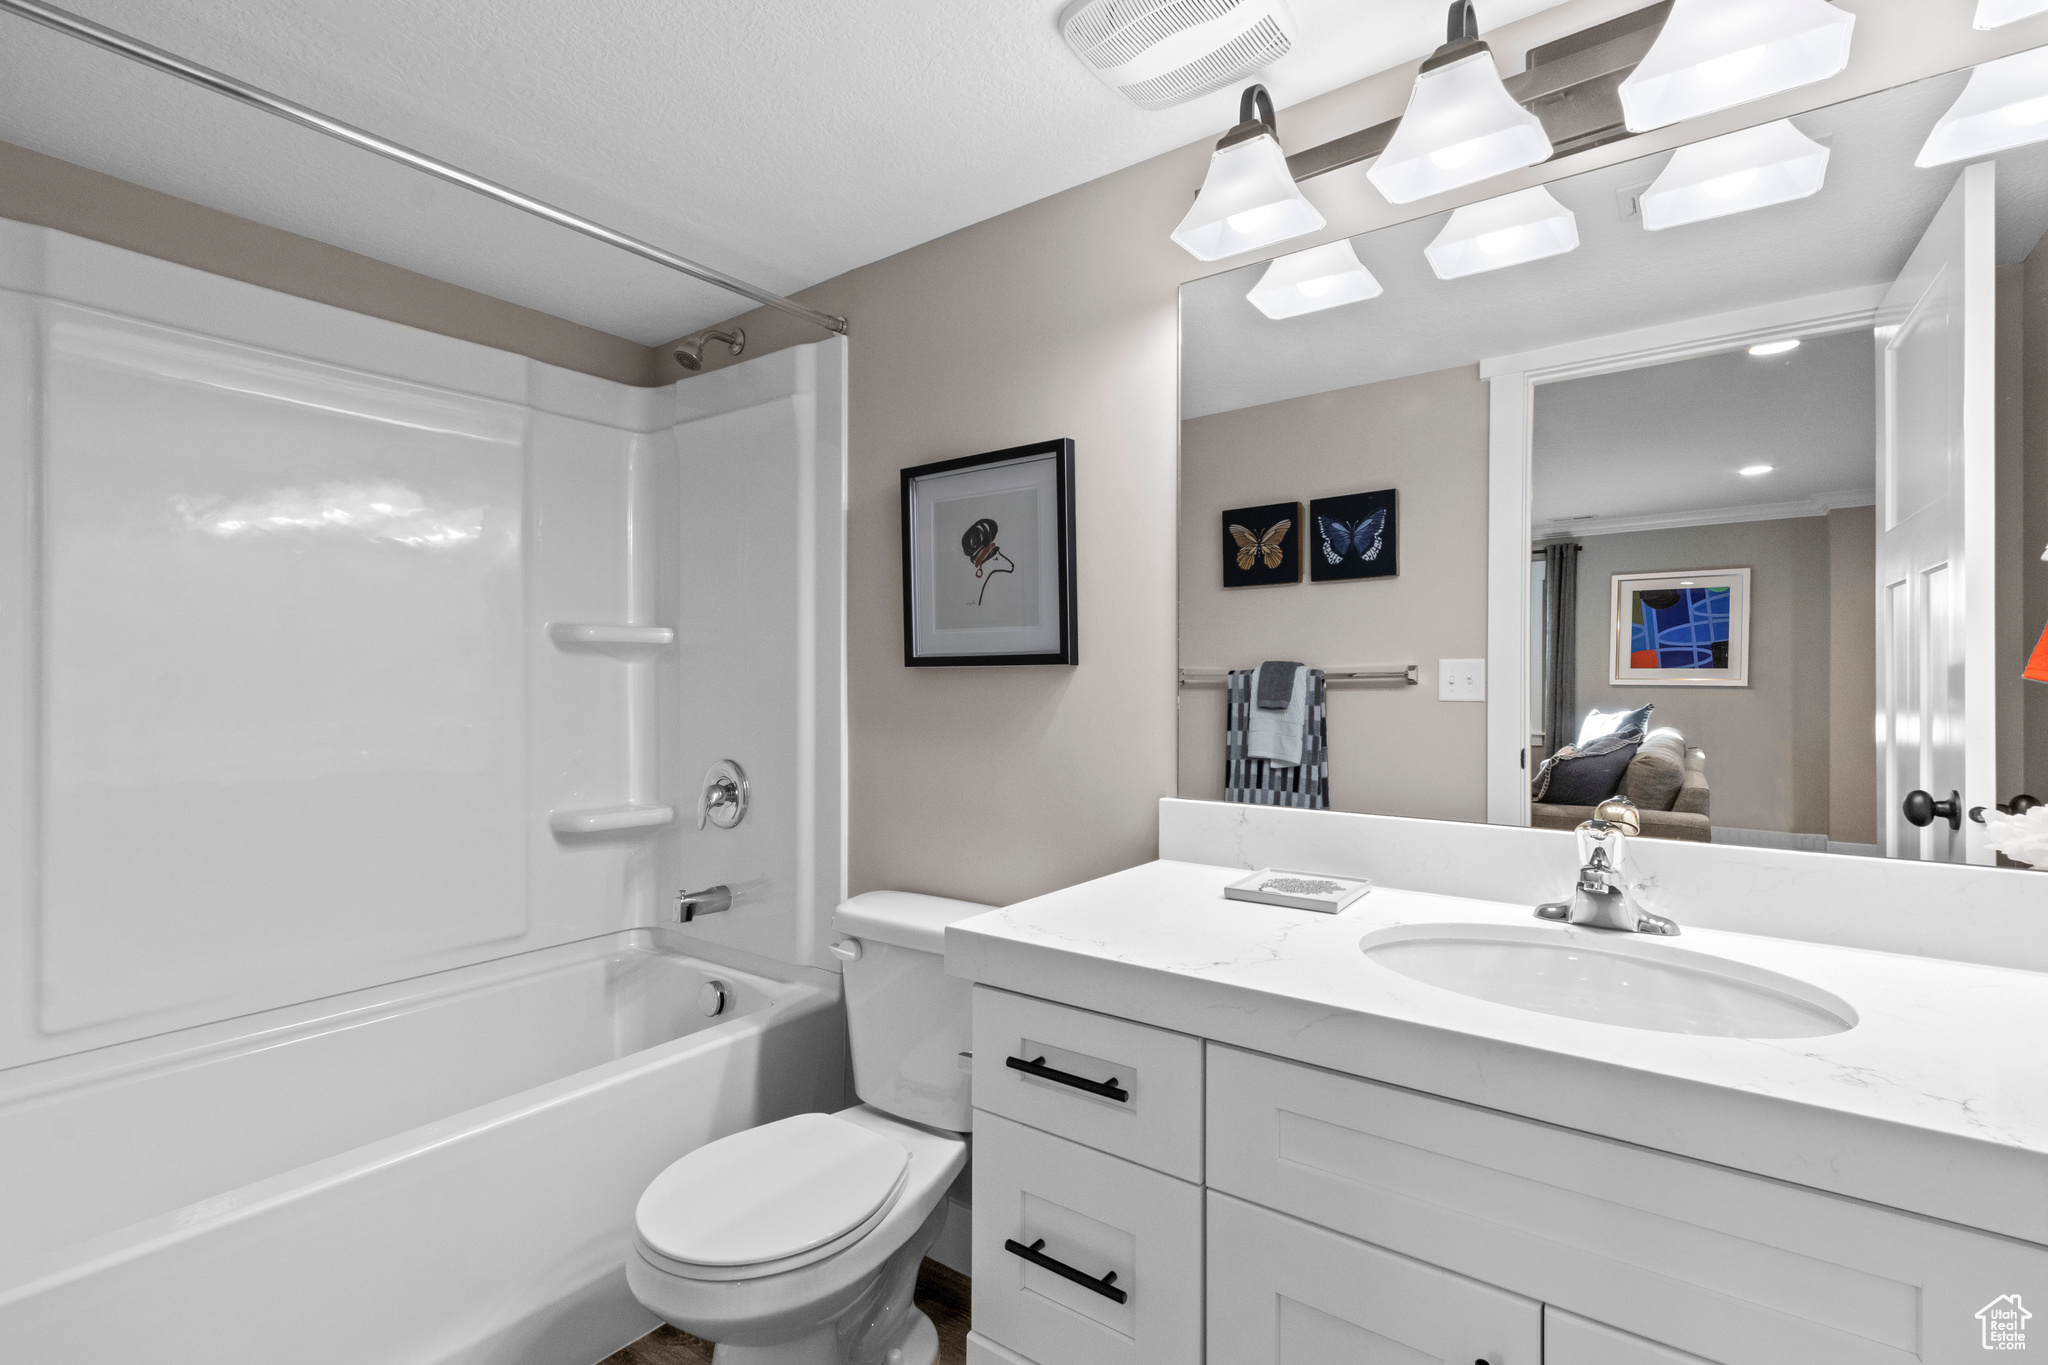 Full bathroom with washtub / shower combination, oversized vanity, crown molding, and toilet